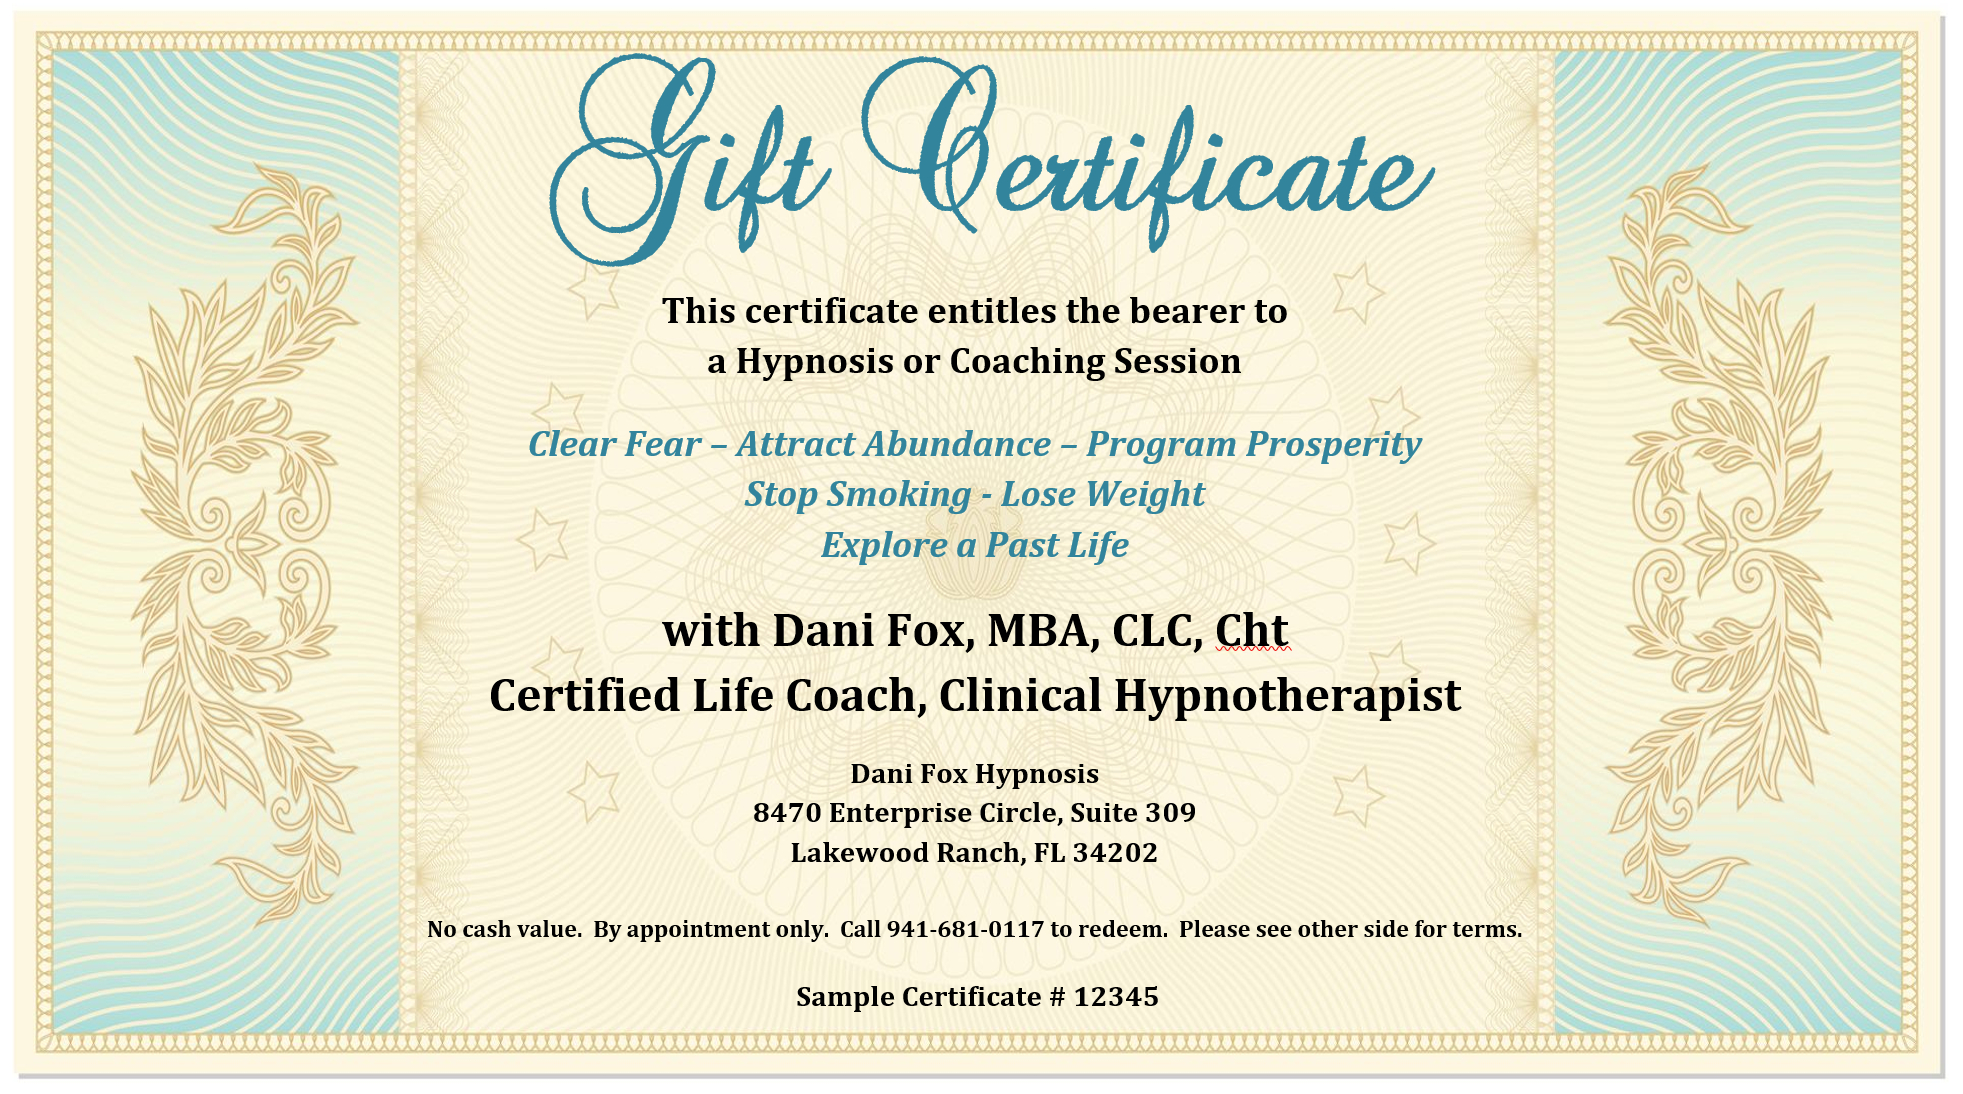 Gift Certificate – Dani Fox Hypnosis With Regard To Sample With Regard To This Certificate Entitles The Bearer To Template